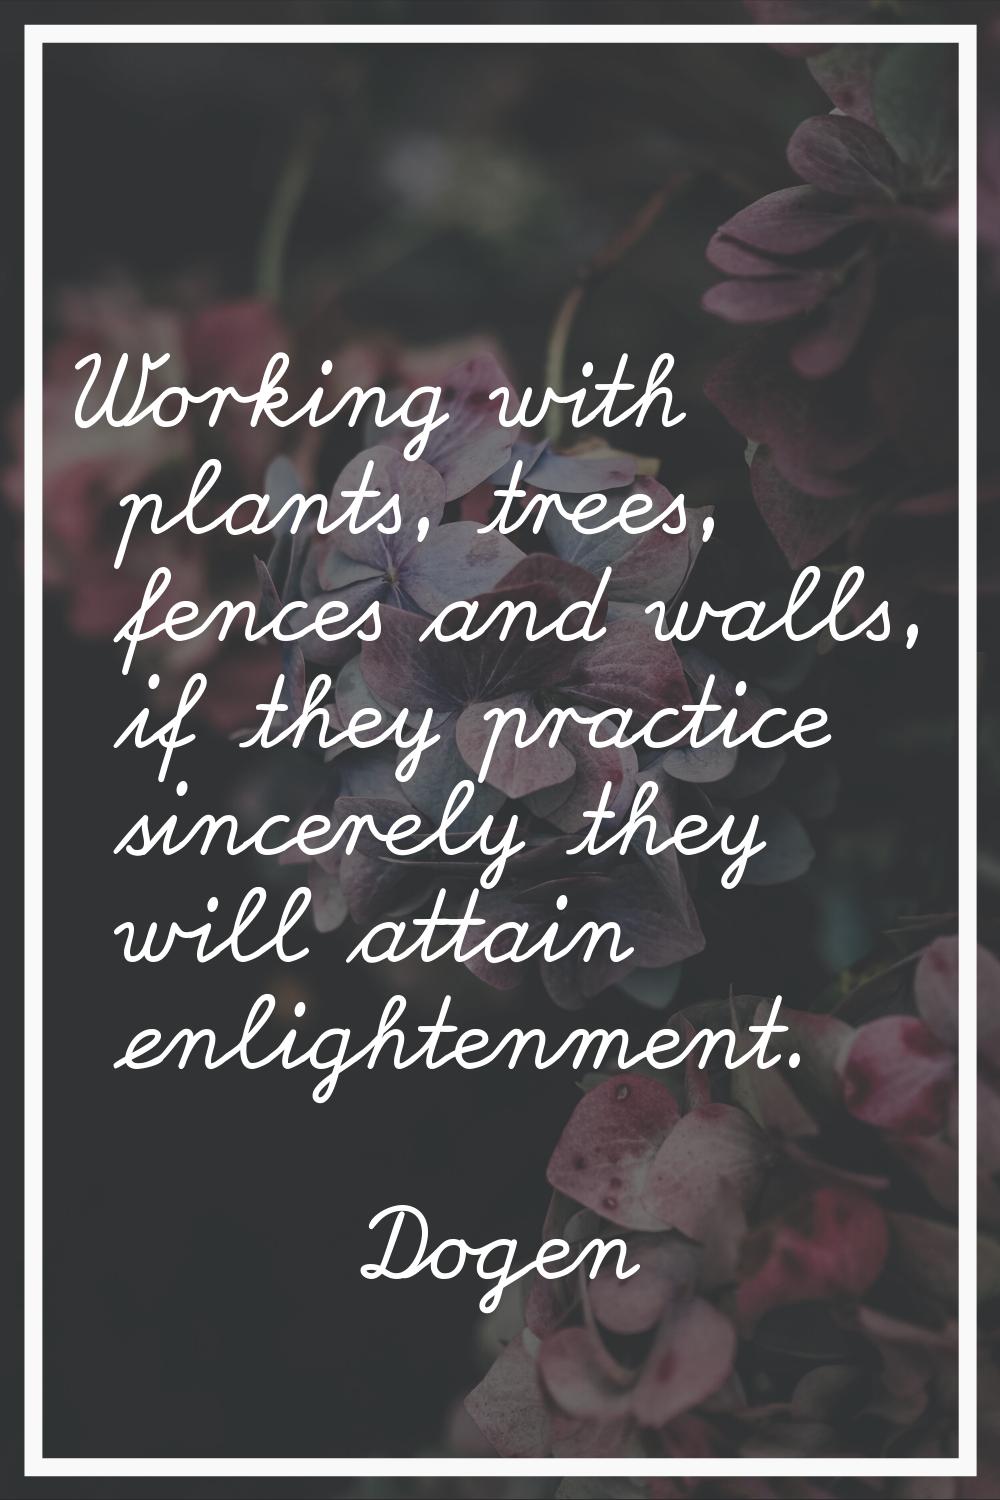 Working with plants, trees, fences and walls, if they practice sincerely they will attain enlighten